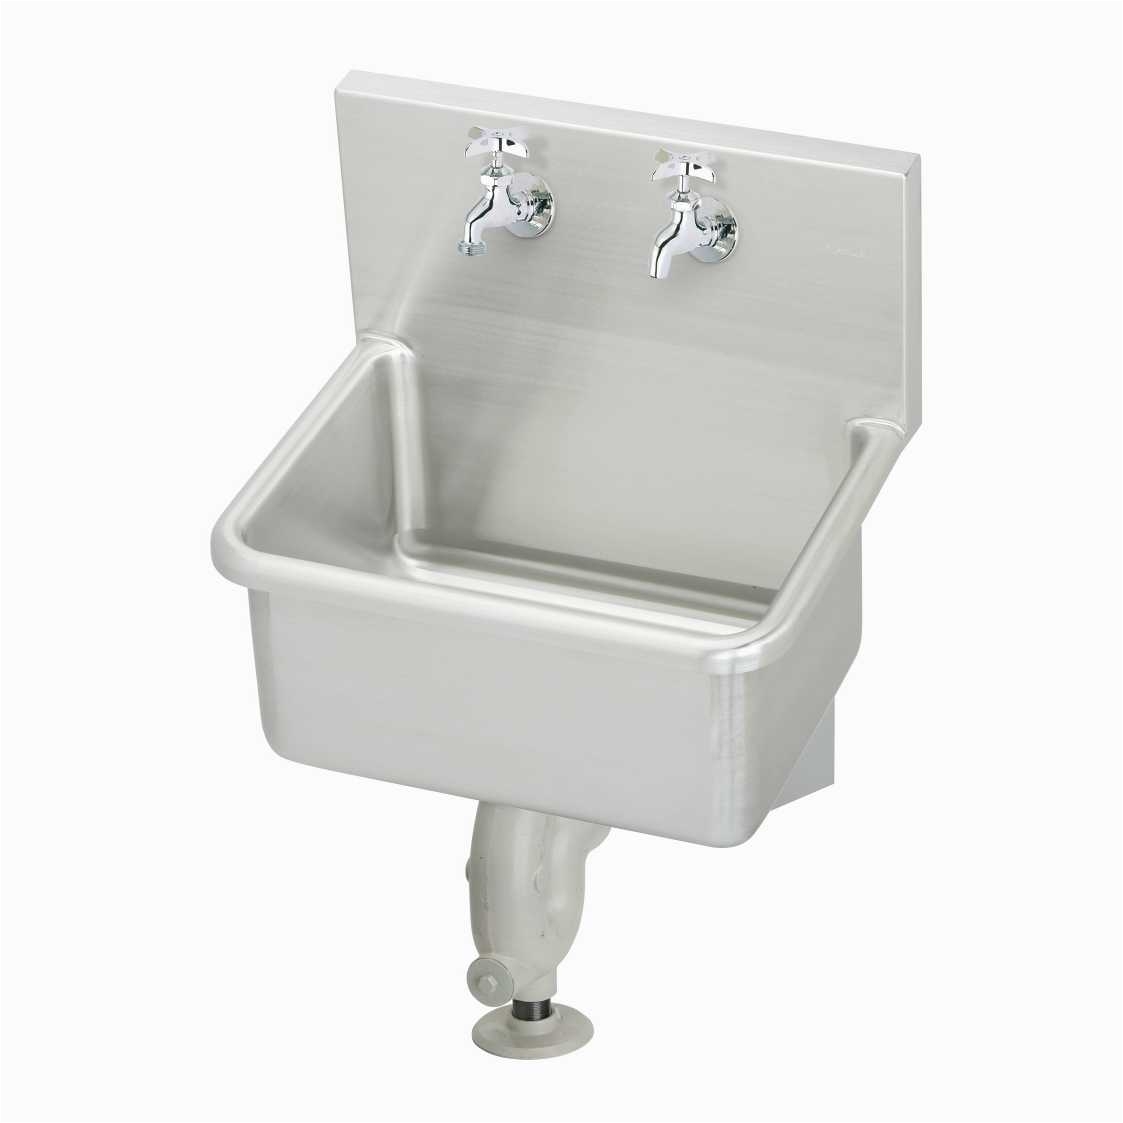 bathroom mop sink home depot perfect europa deluxe laundry sink 1000x1000h with washboard sinki 0d